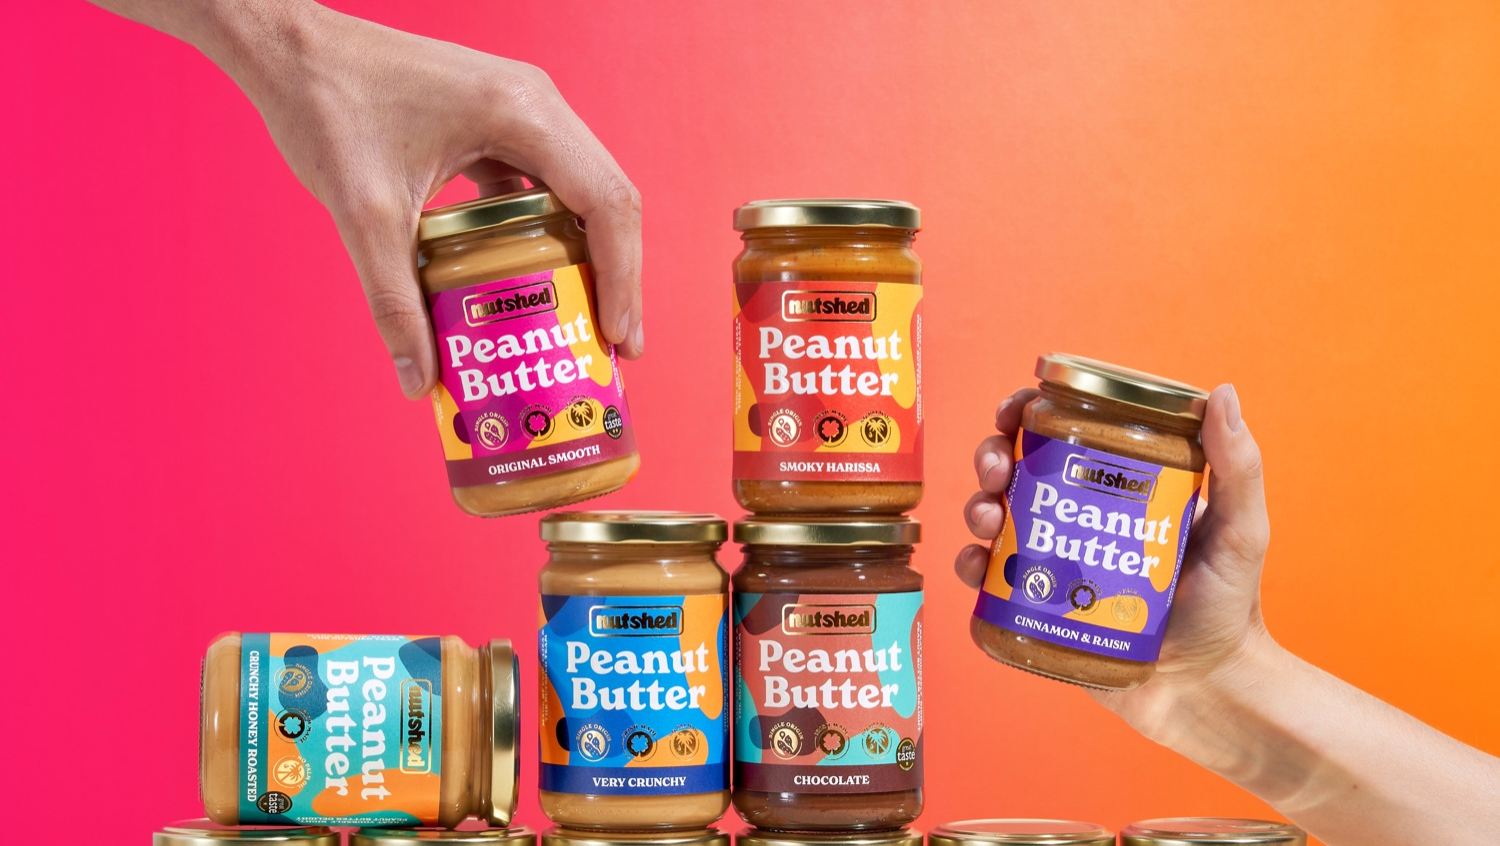 Invade Design Helps Nutshed Take Over The Nut Butter Space With Bright Colors and Custom Type